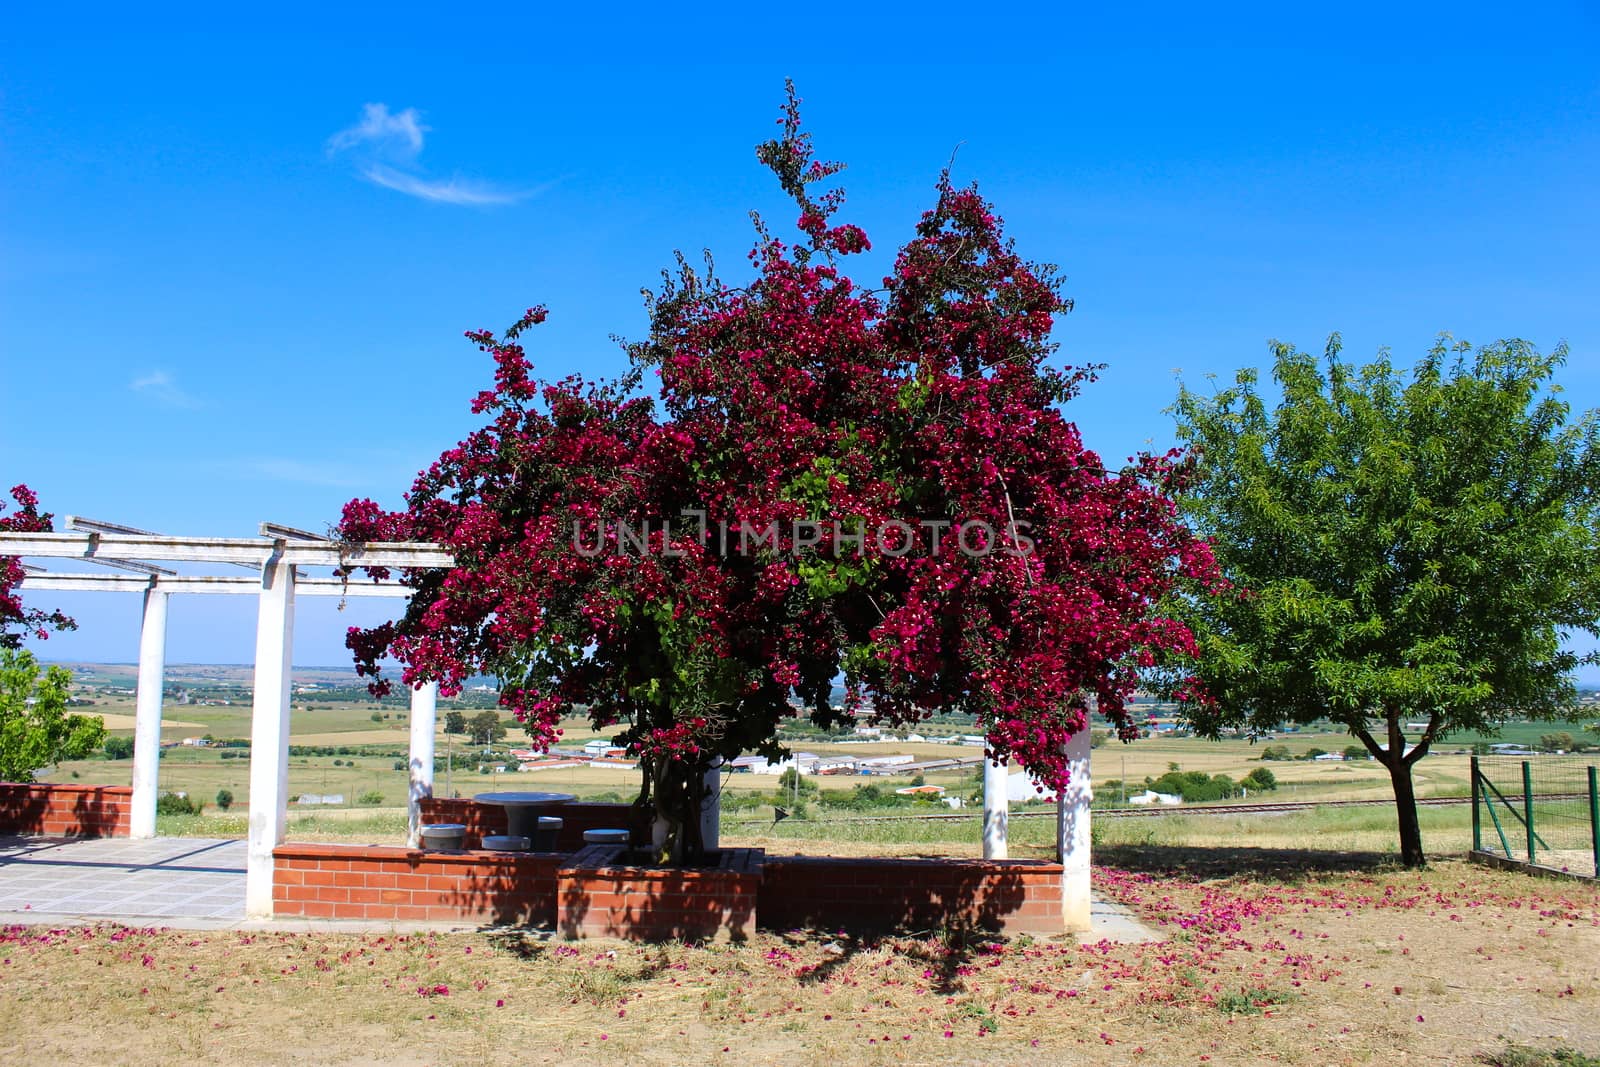 Great bougainvillea tree that creates shade for sitting. Seating and relaxation area in Beja, Portugal.